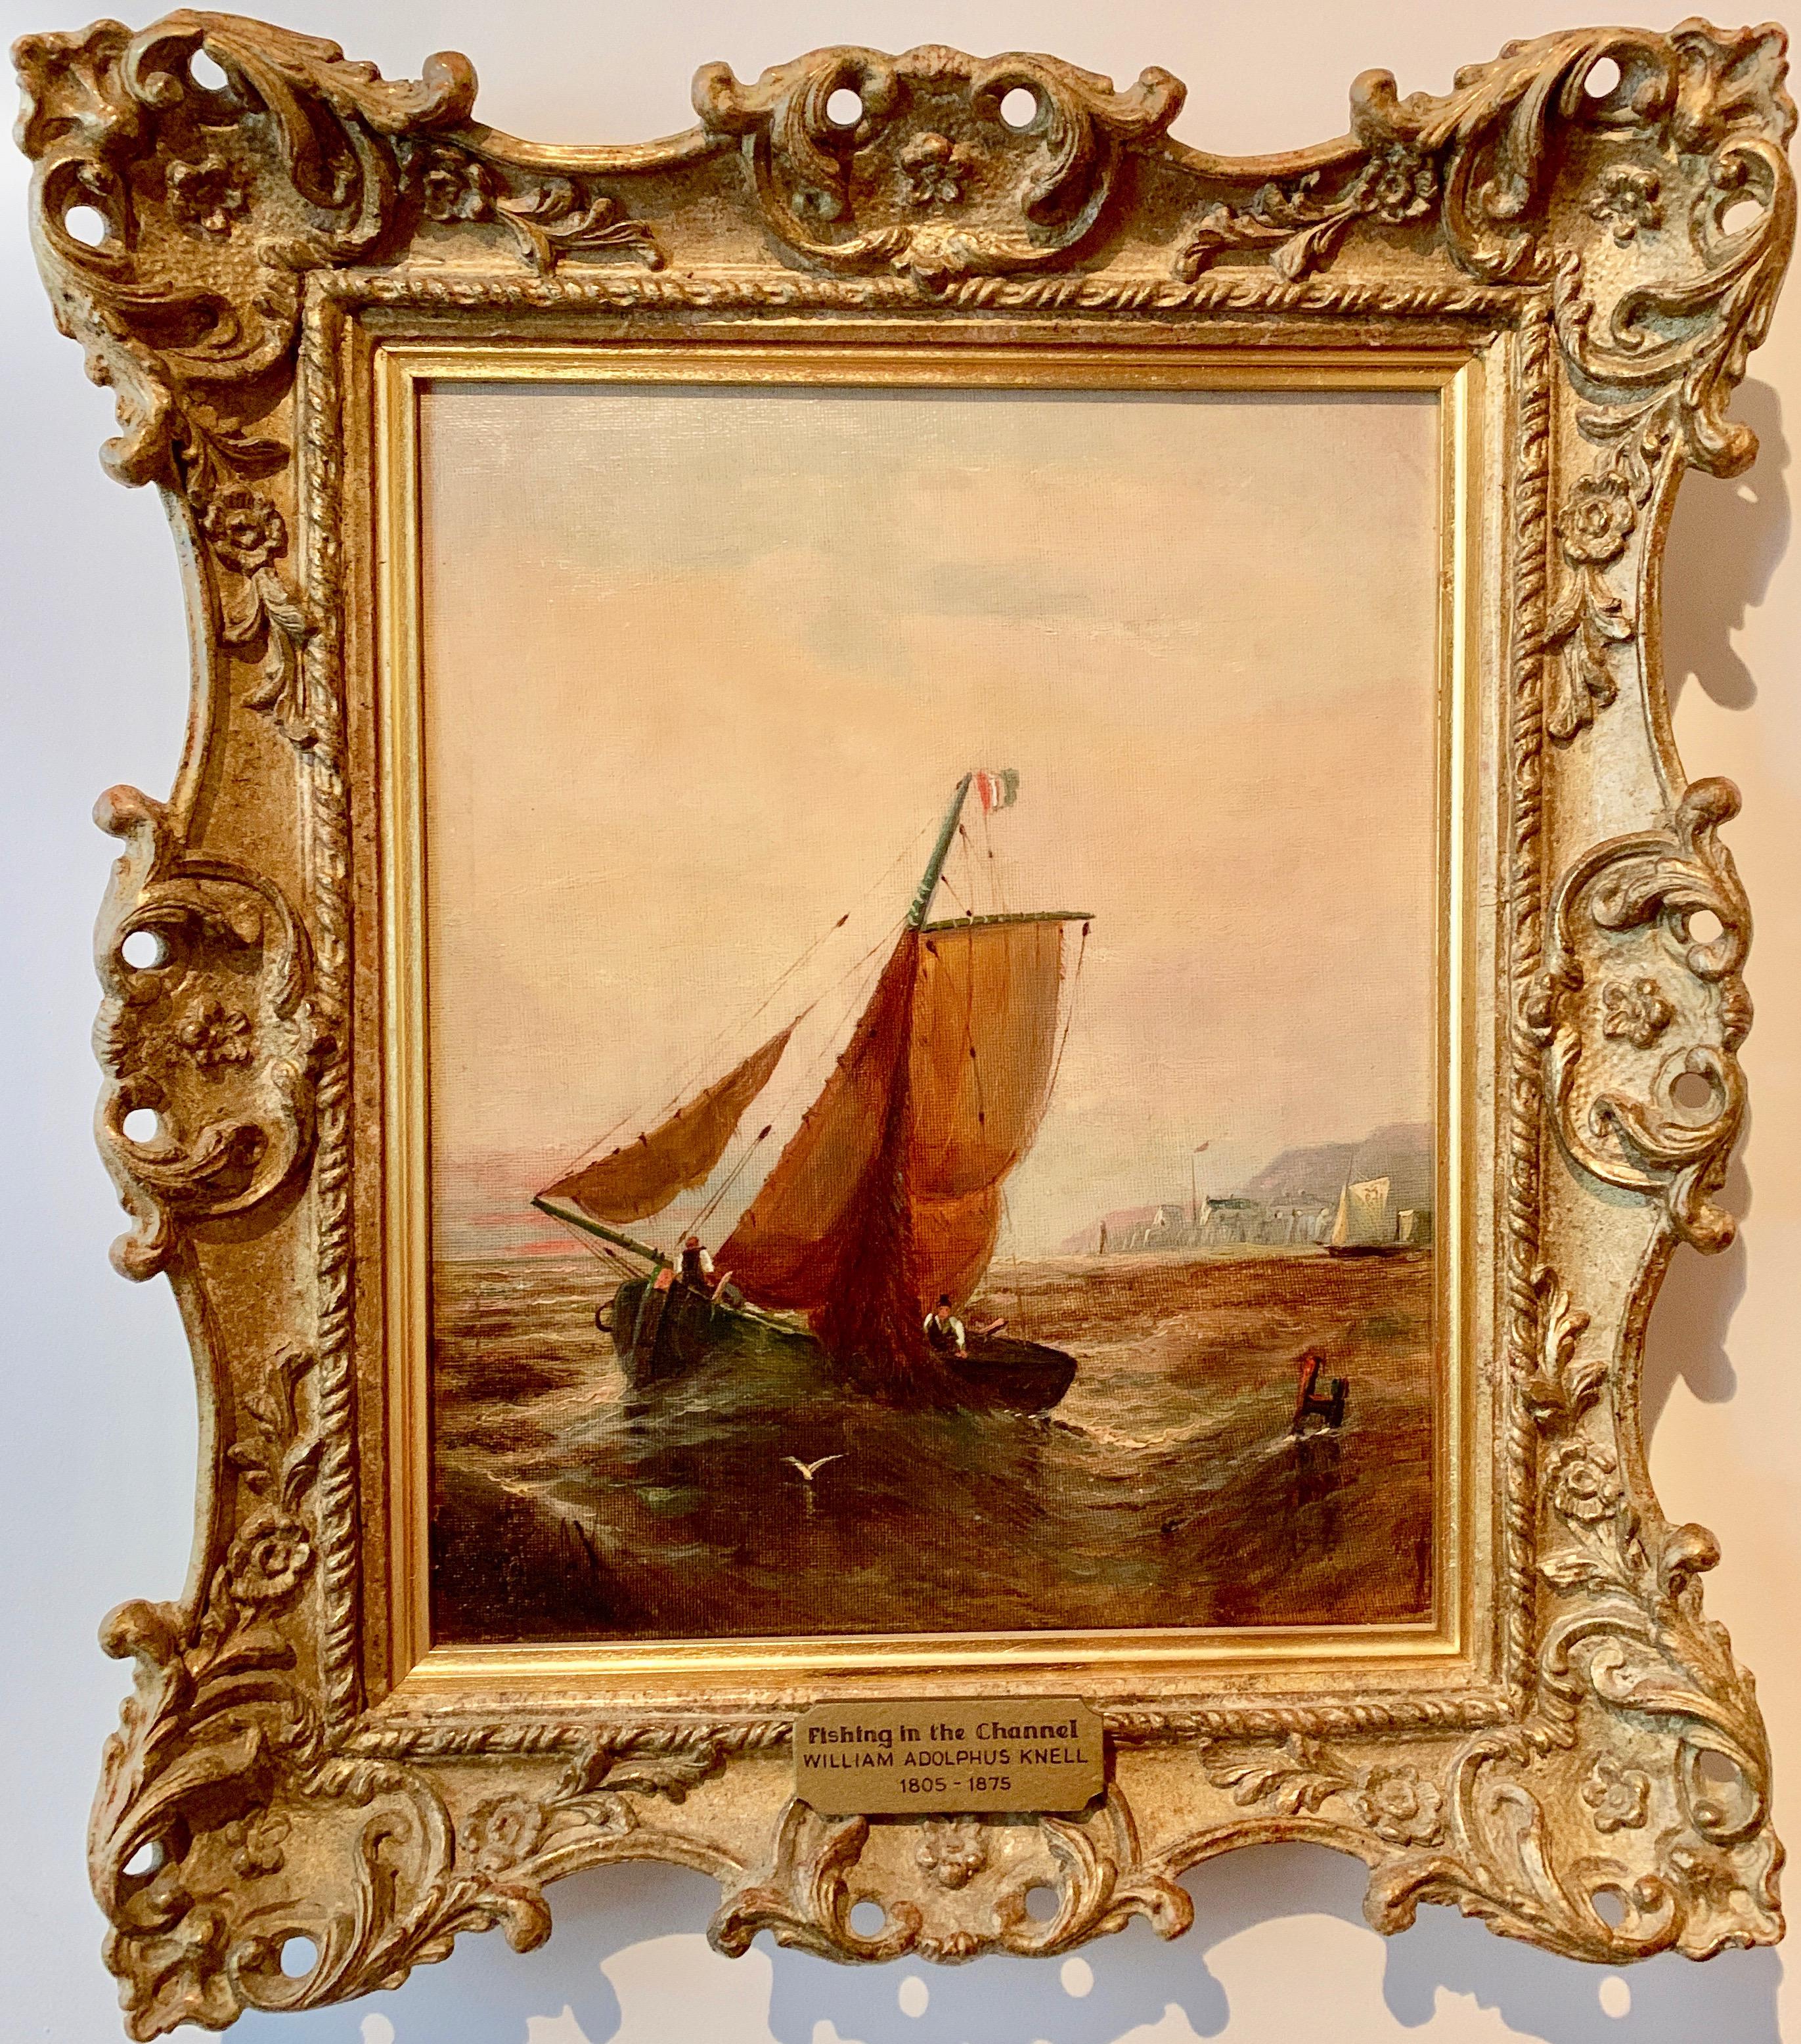 William Adolphus Knell Figurative Painting - English Victorian 19th century fishing boat in the English Channel